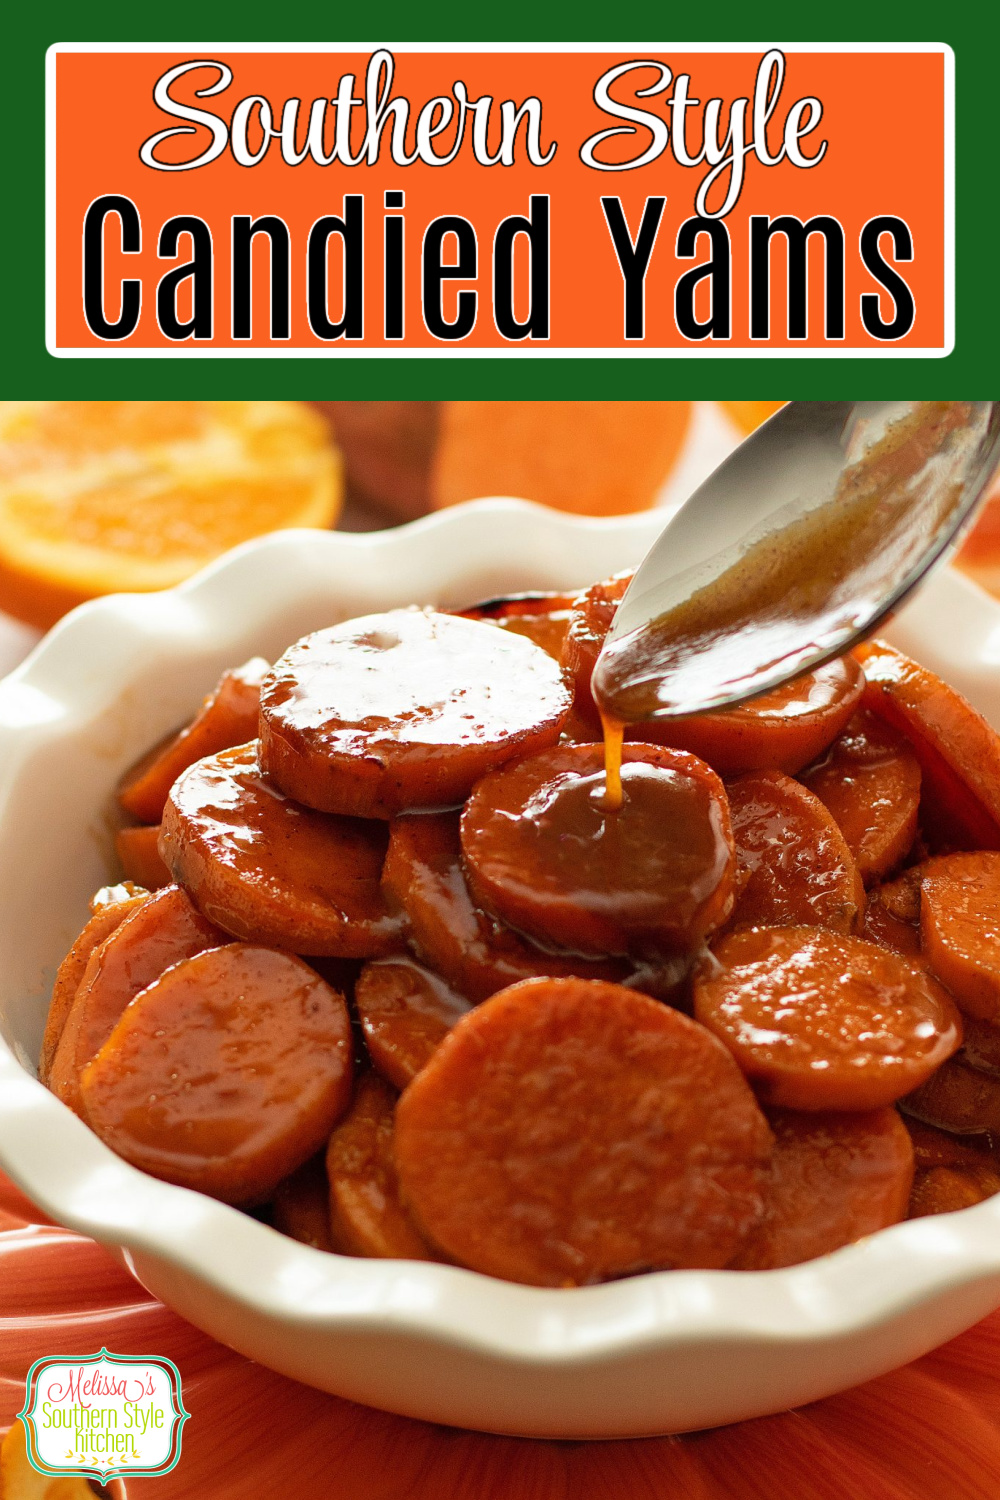 These brown sugar glazed Candied Yams are a holiday side dish staple. They're tender and caramelized ideal for serving with turkey or ham #candiedyams #southernyams #howtomakeyams #candiedsweetpotatoes #sweetpotatorecipes #yams #cookedyams via @melissasssk